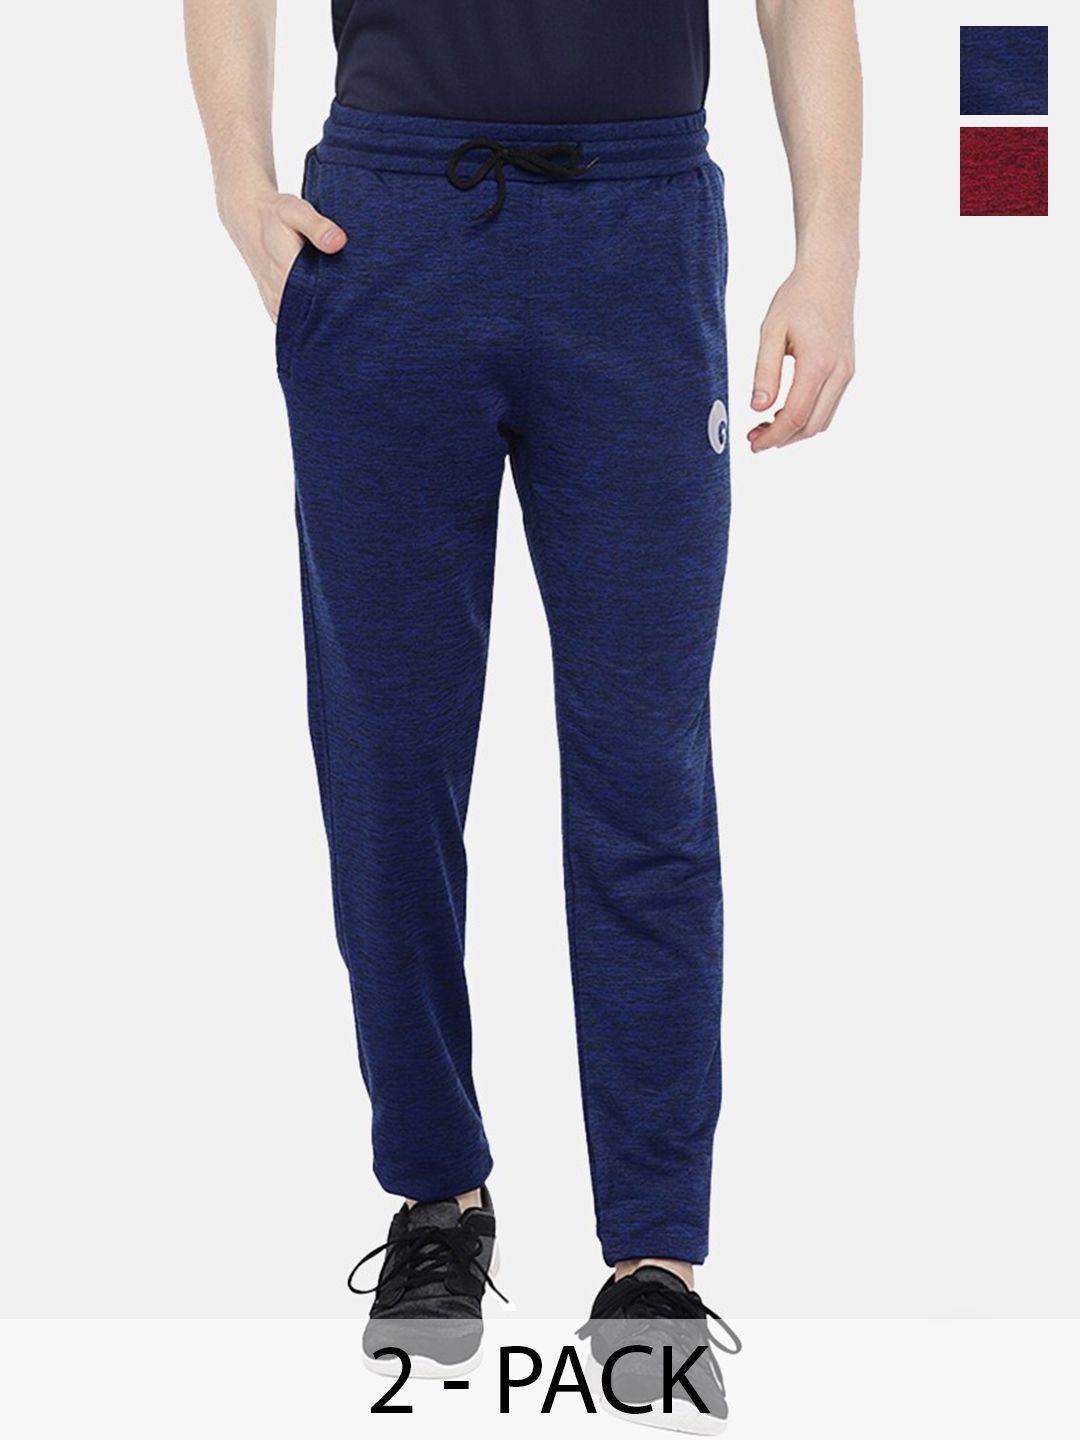 omtex-men-pack-of-2-mid-rise-track-pants